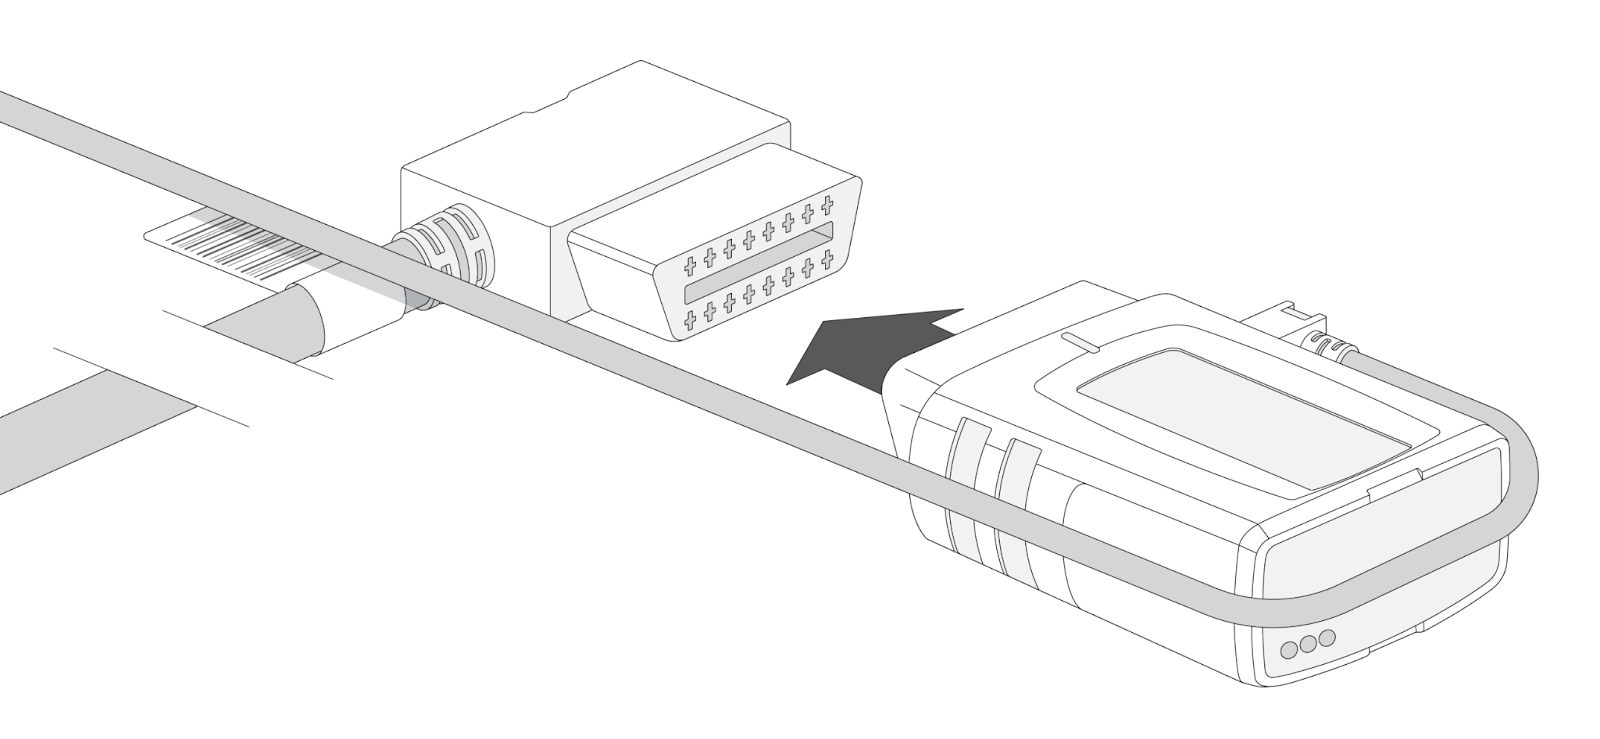 Line drawing of GO device being installed in asset